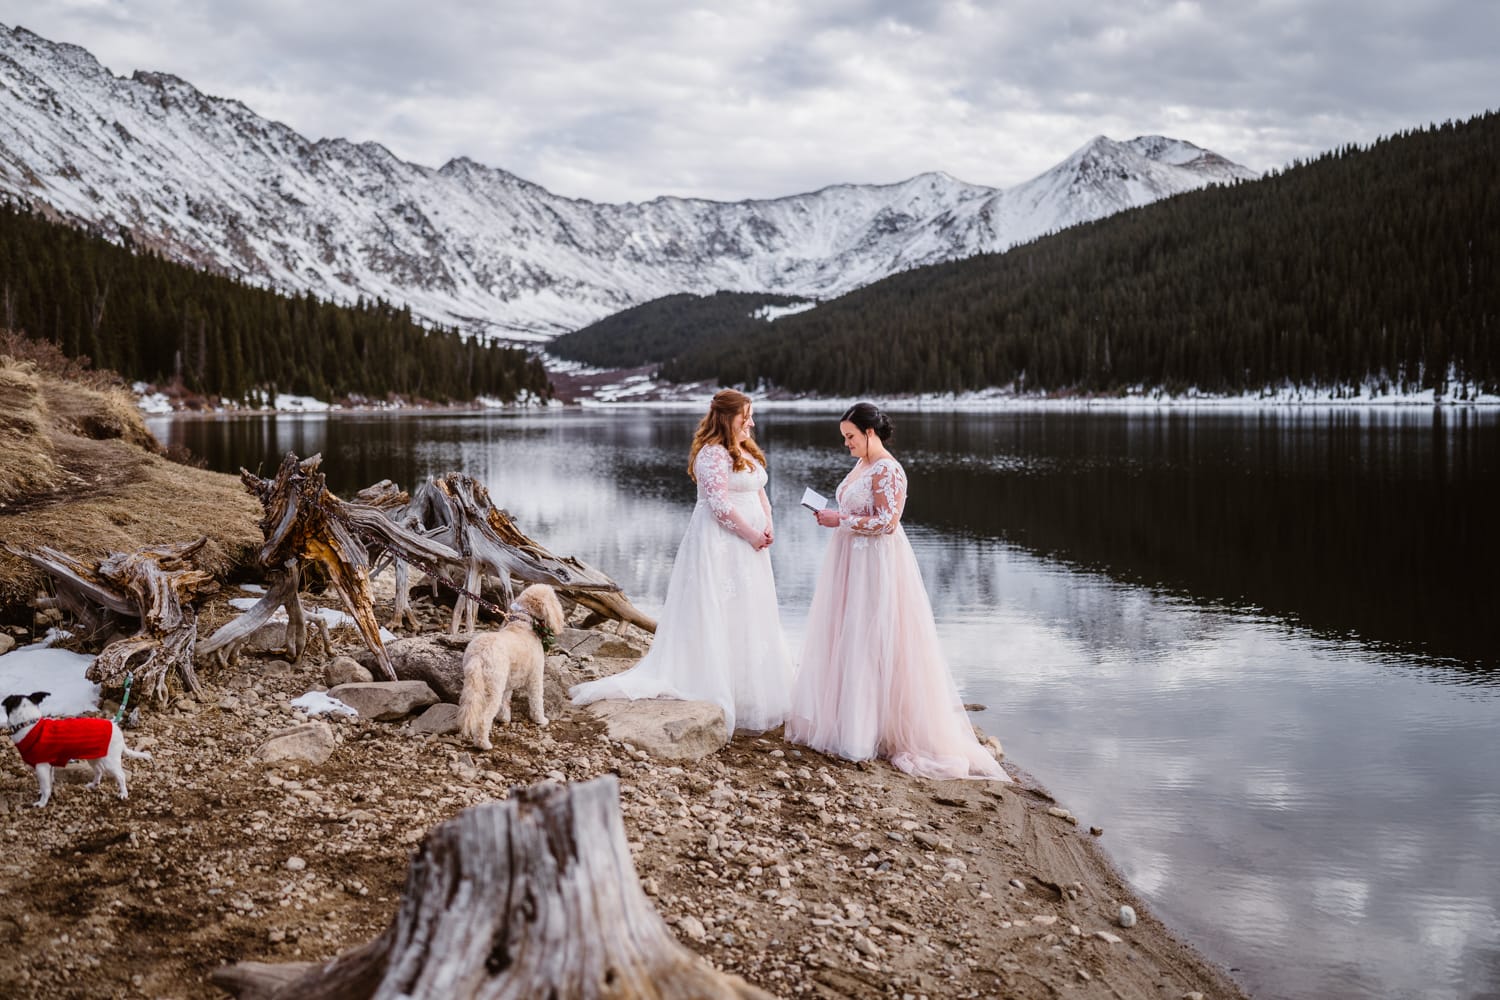 Two brides sharing their vows with their dogs at alpine lake in Colorado for their Self-Solemnization.